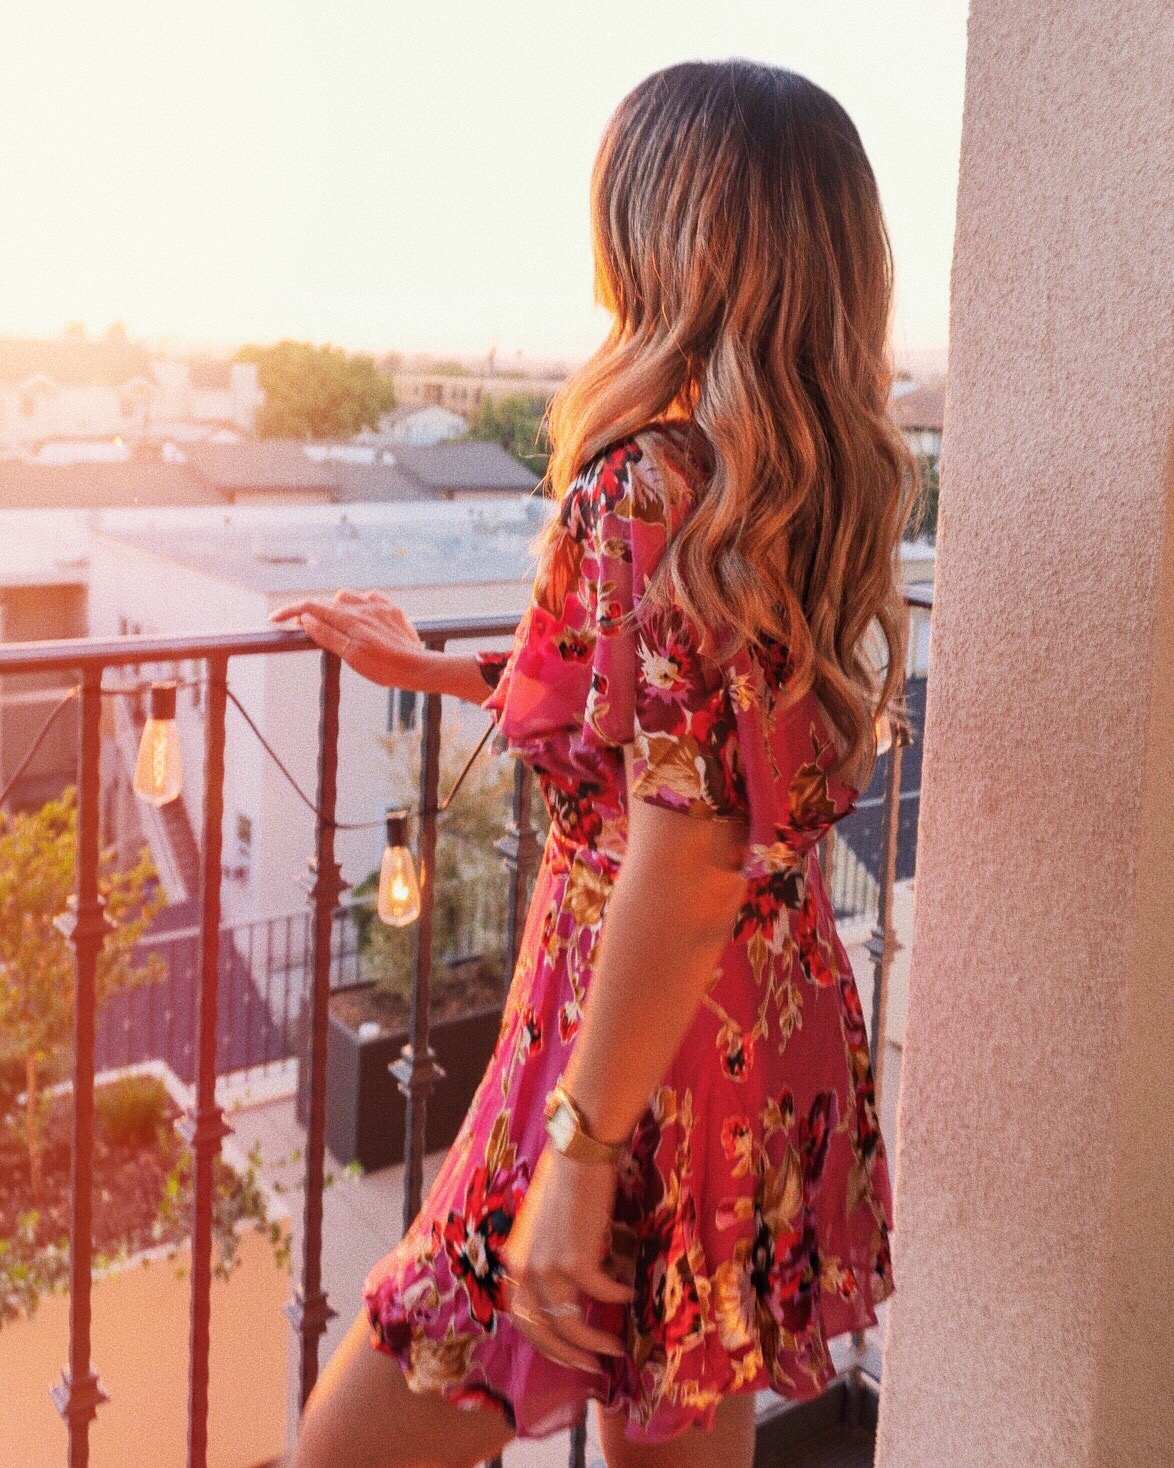 ale by Alessandra x revolve, Xiomara dress, romantic dress, romantic date night outfit, parmida Kiani, what to wear, how to style, la blogger, revolve dress, asymmetrical dress, off the shoulder dress, golden hour ottd, ottn, fashion Inspo, date night outfit, date night dress, marc Jacobs beauty truth or bare lipstick,